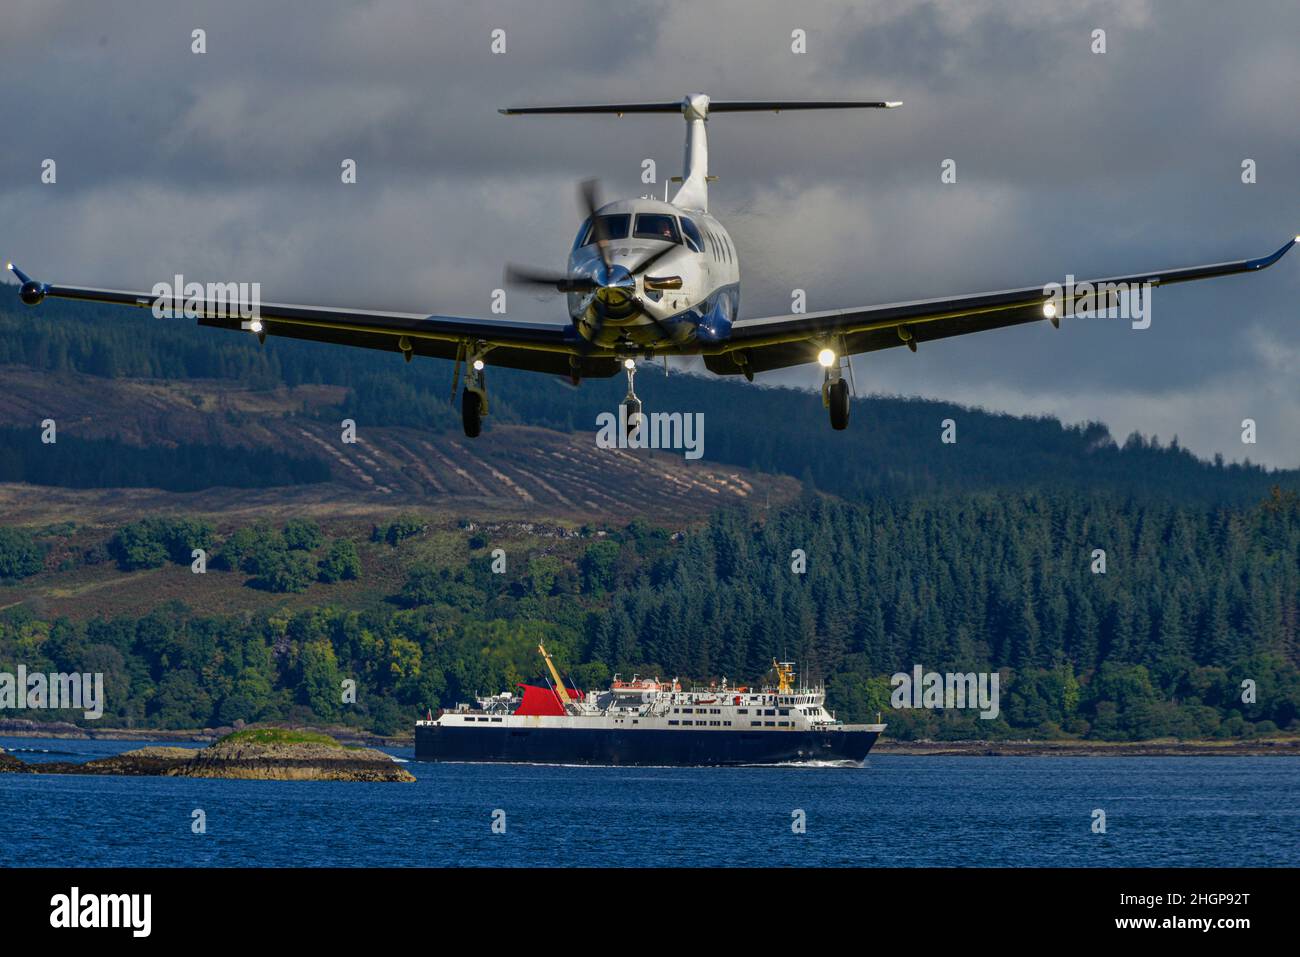 A Pilatus PC12 aircraft with undercarriage down about to land. In the background is an inter island ferry. Isle of Mull, Scotland. Stock Photo